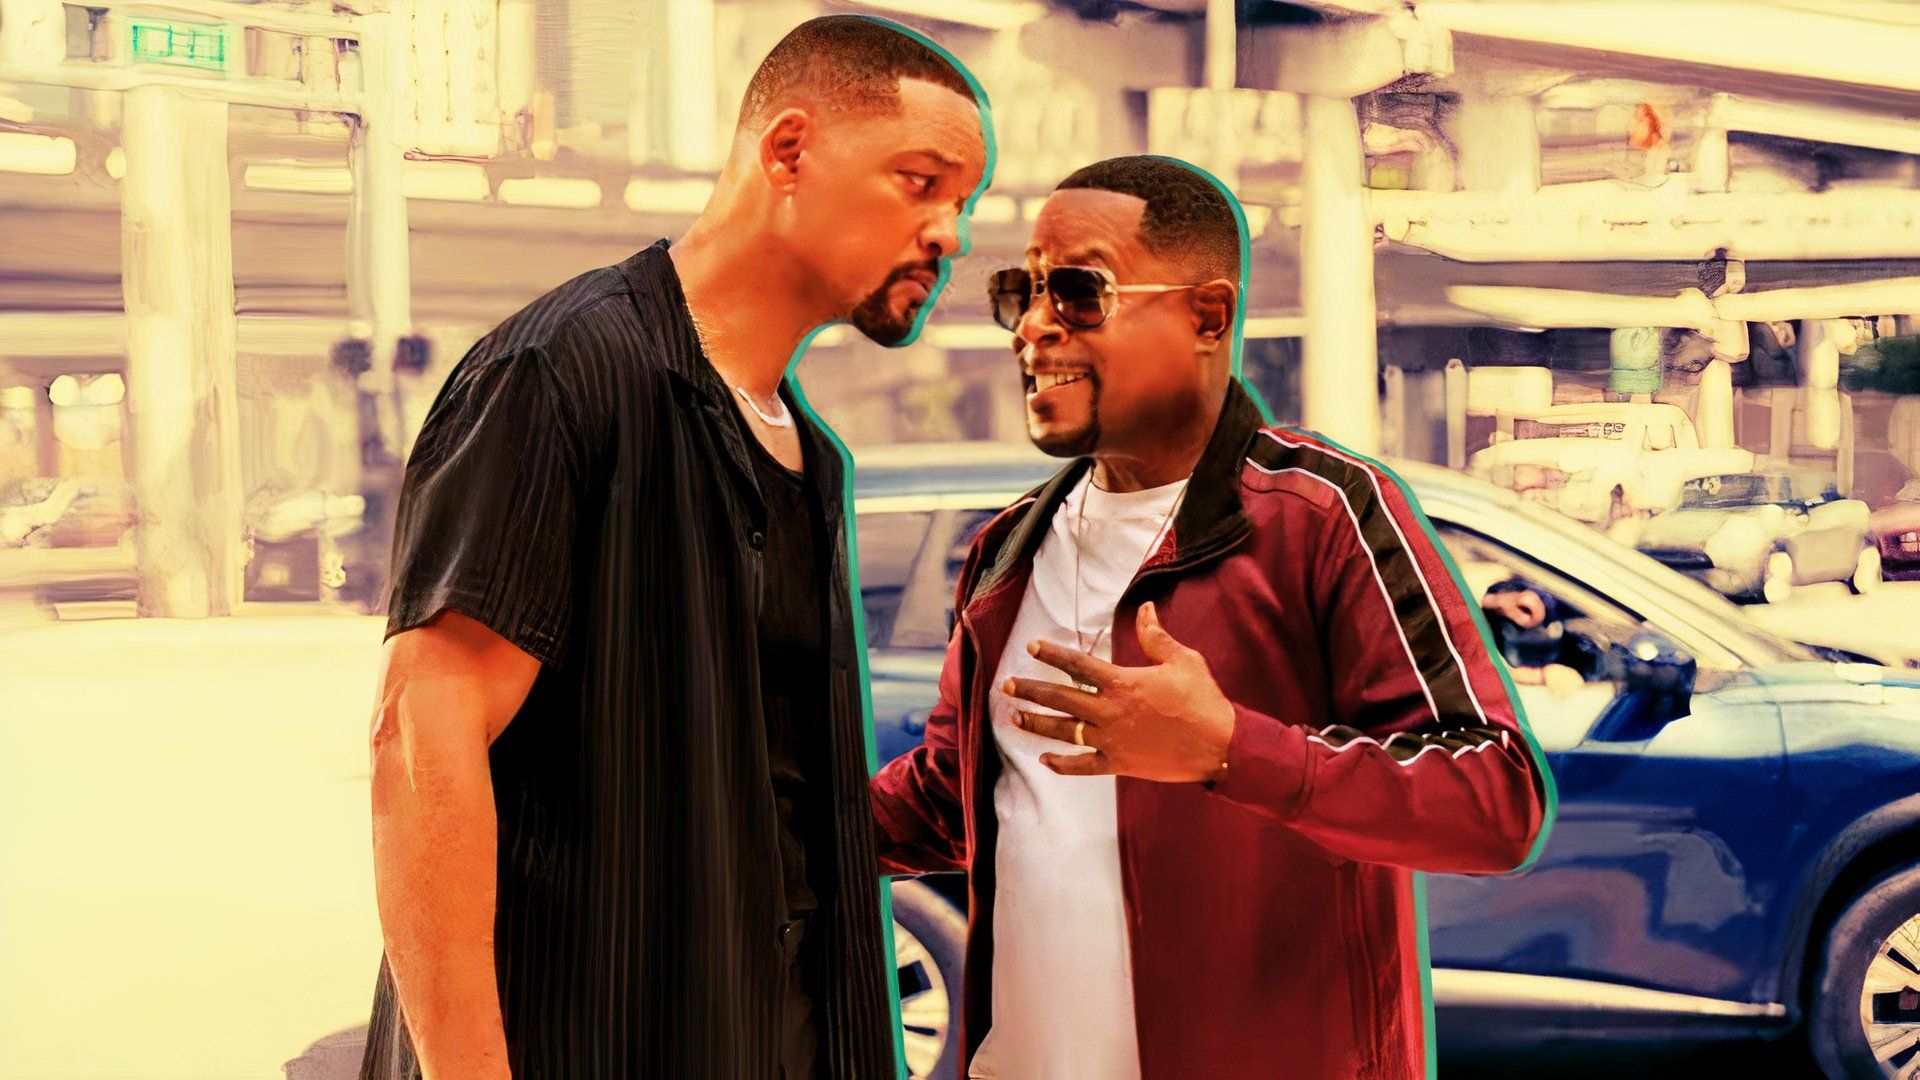 Martin Lawrence & Will Smith in Bad Boys Ride or Die